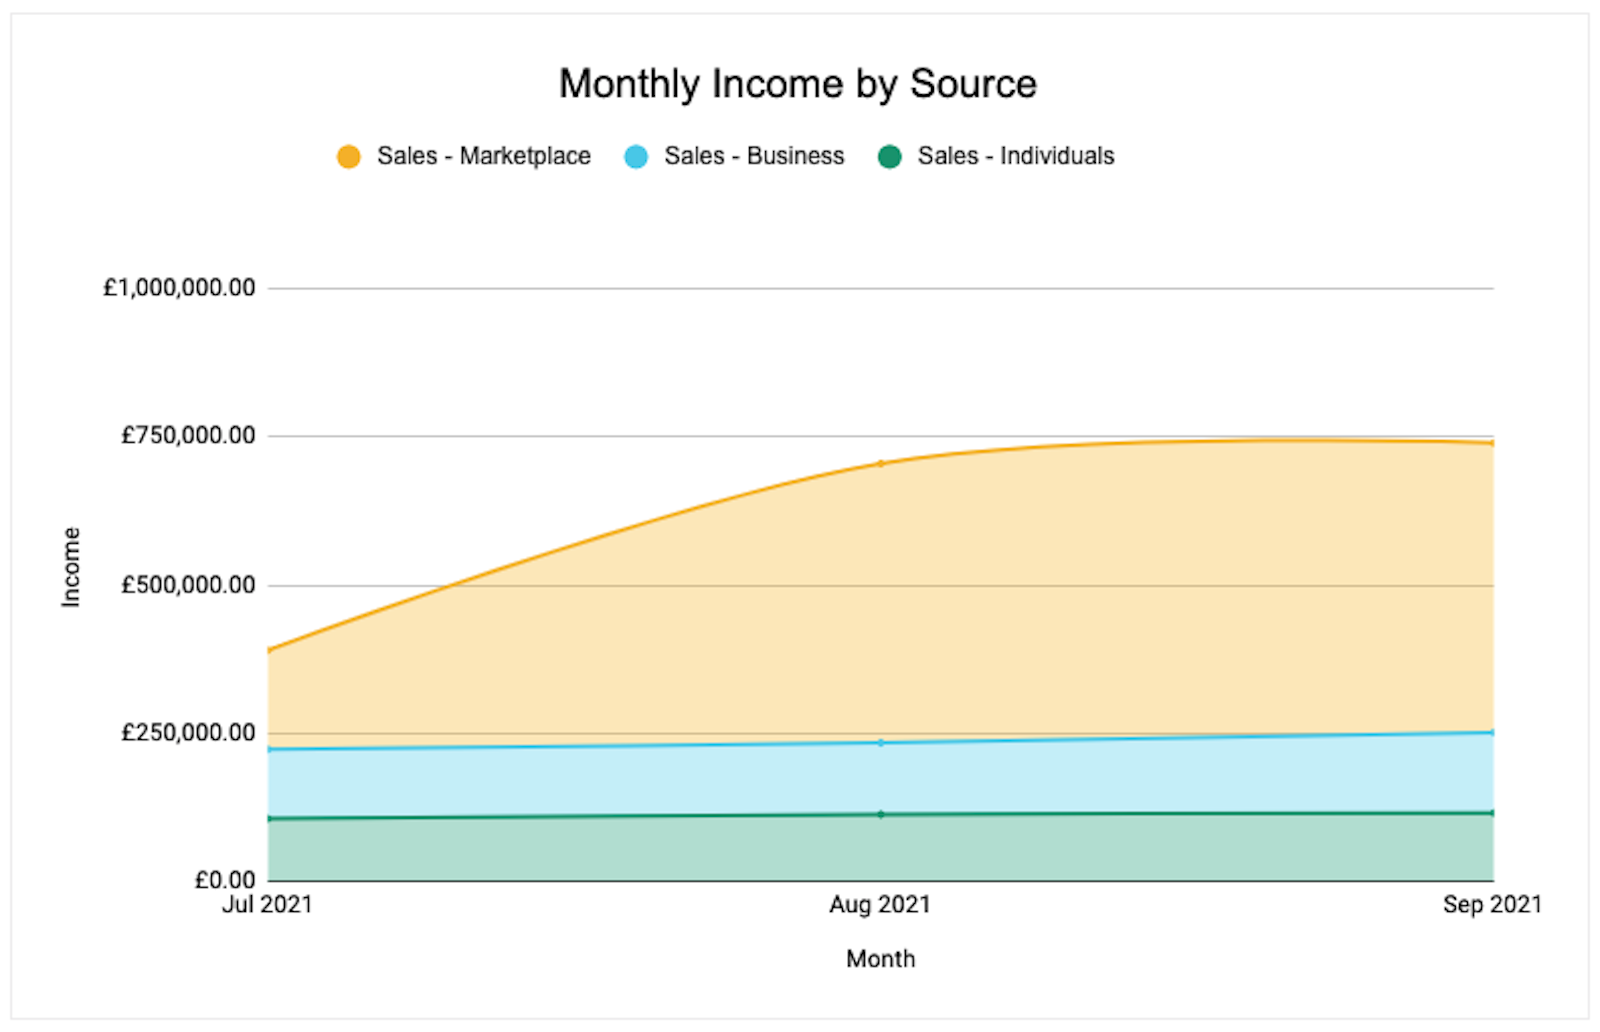 Monthly income by source